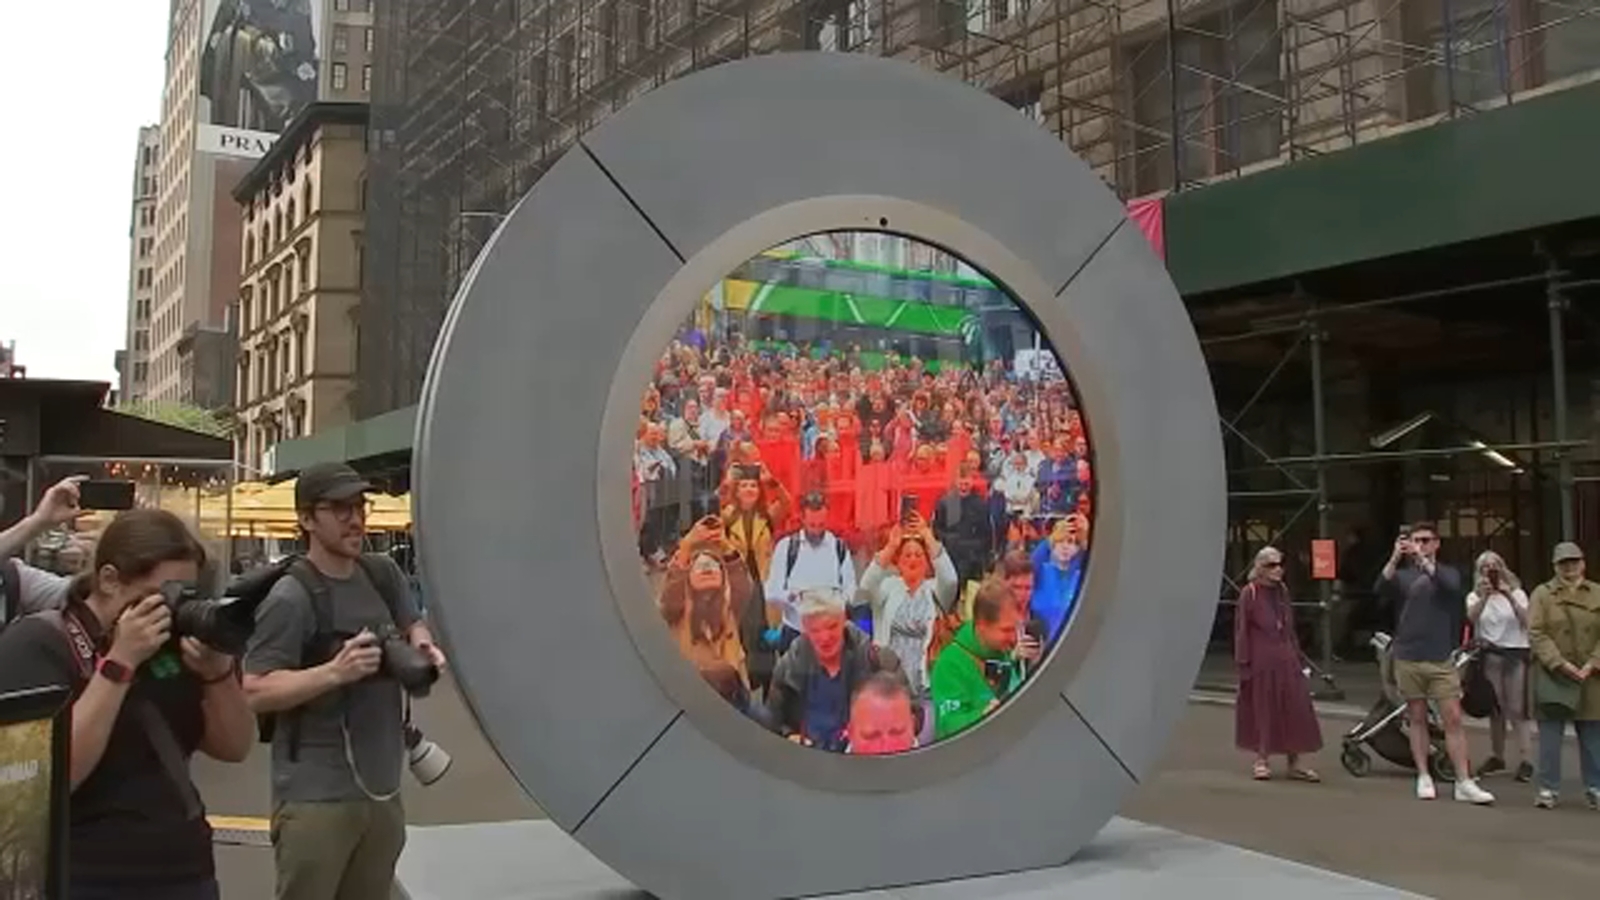 NYC Portal: The virtual screen connecting New York City and Dublin has reopened [Video]